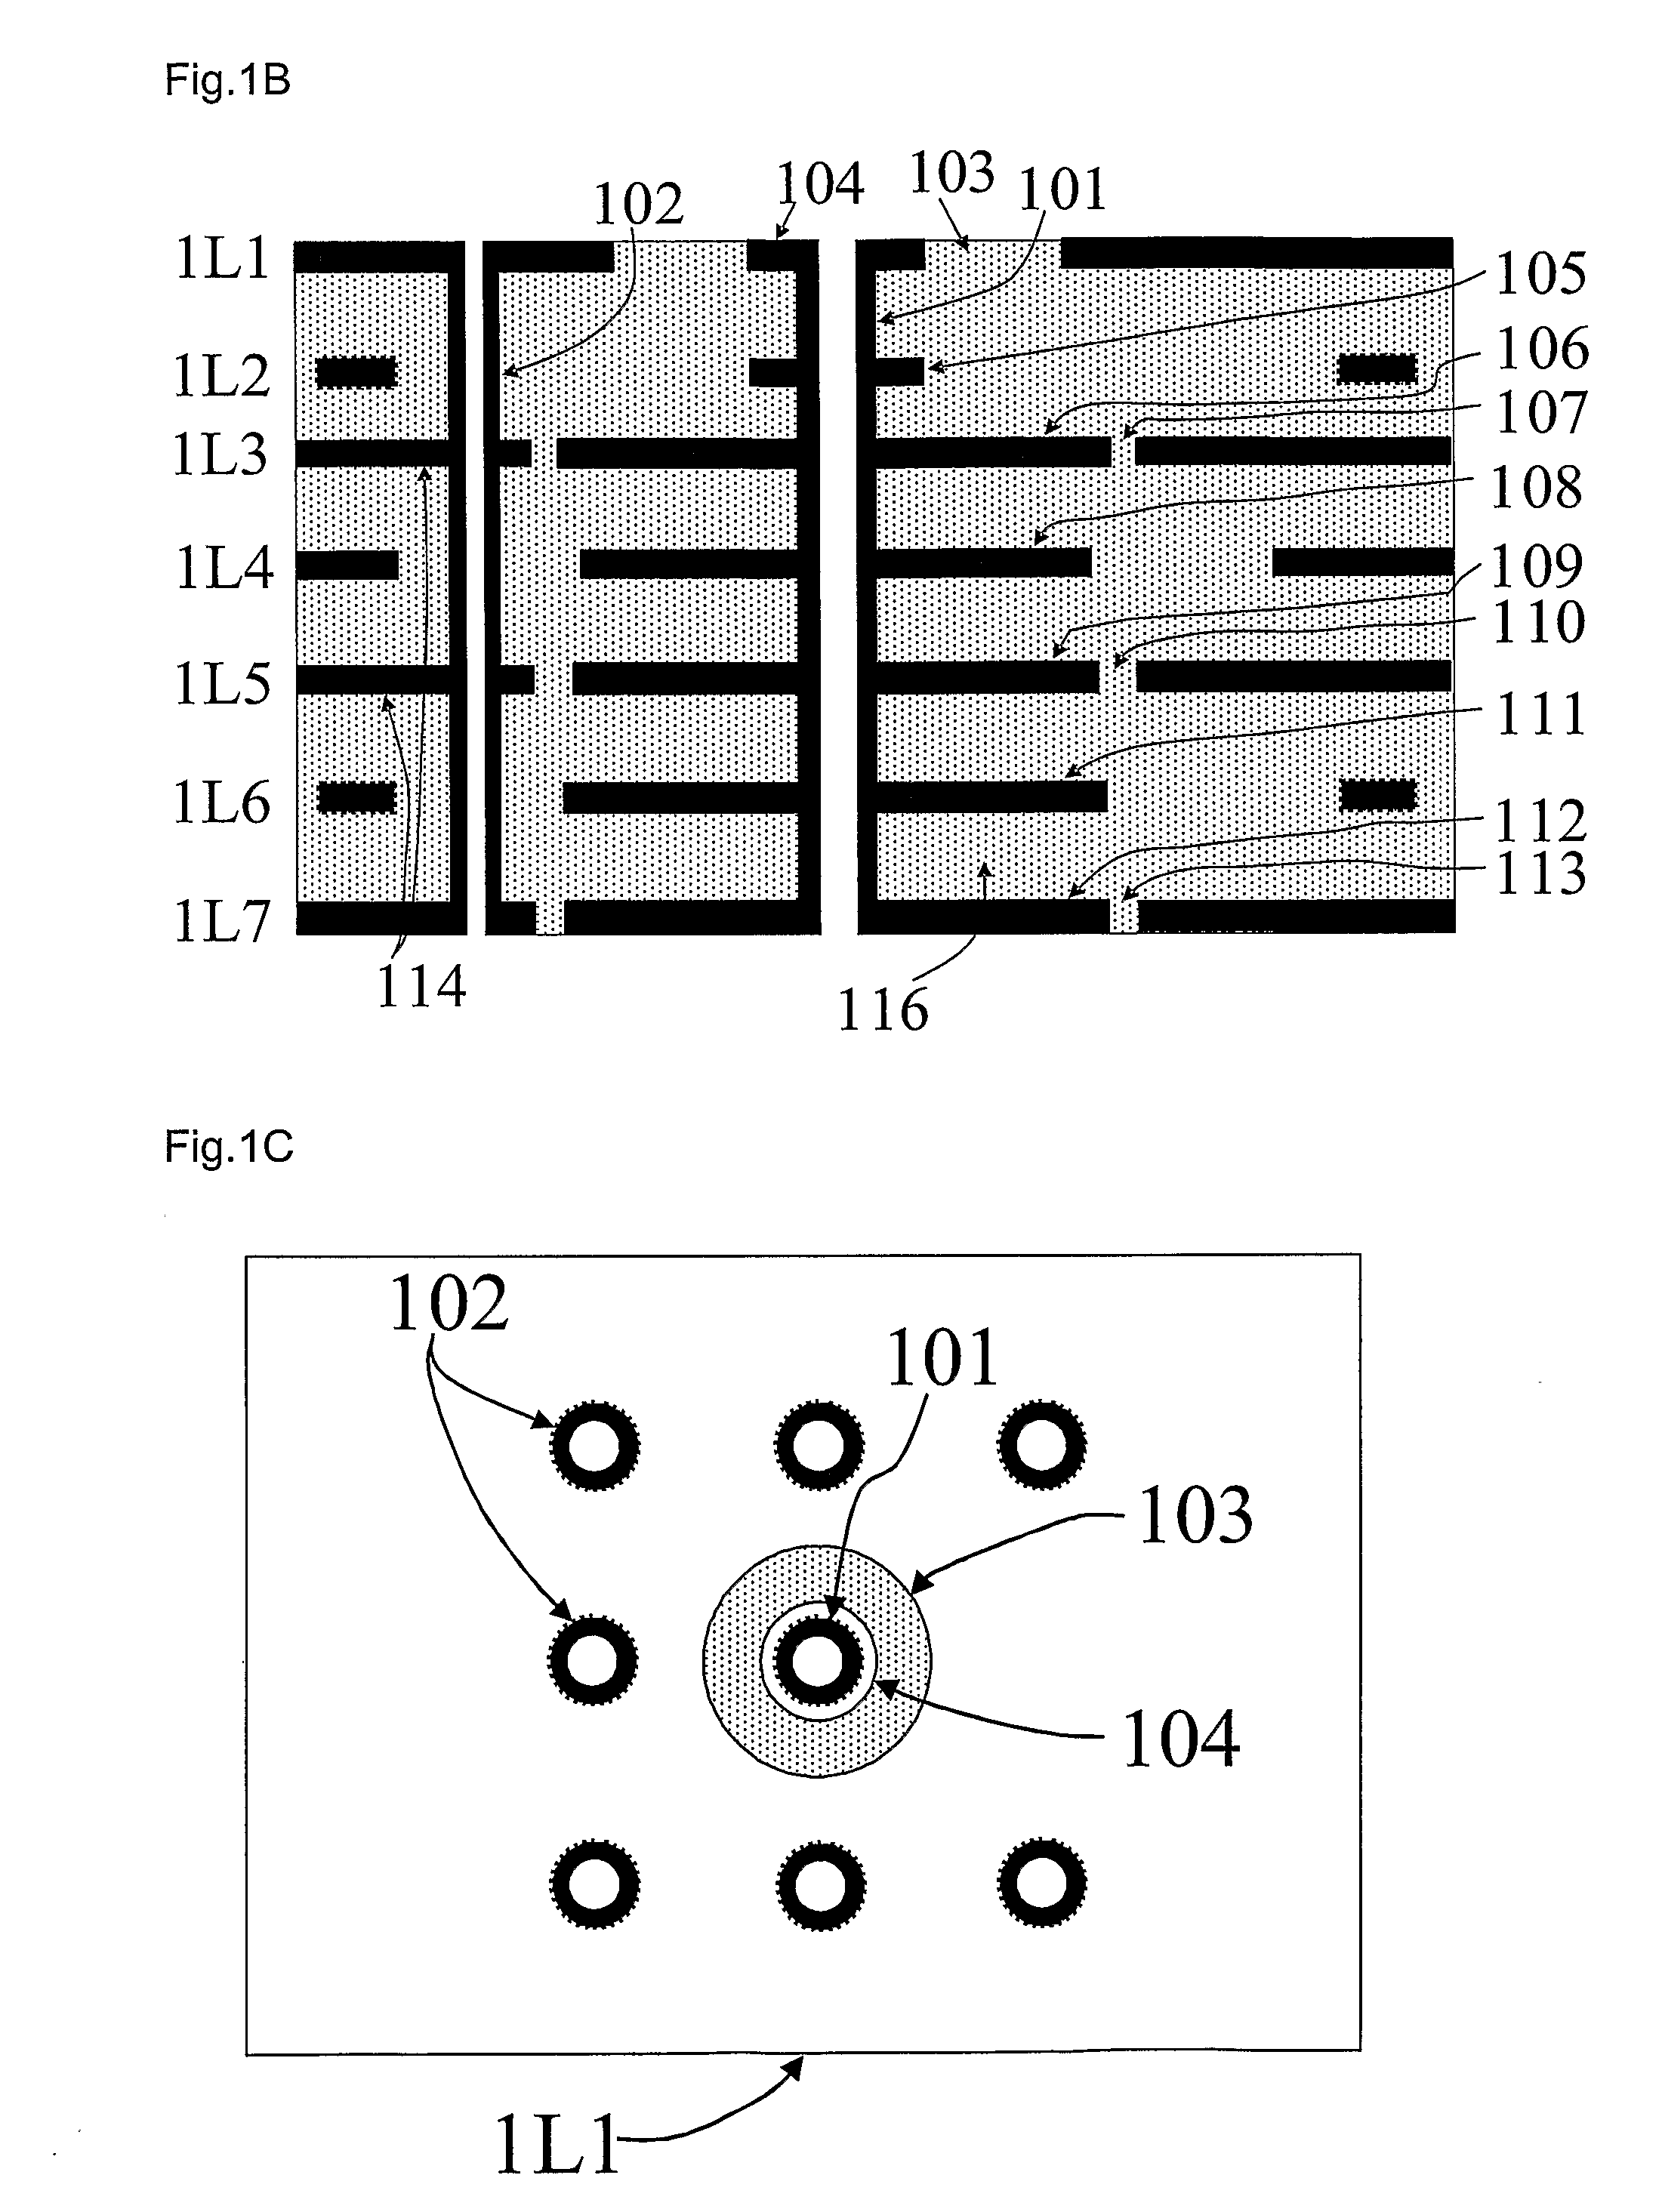 Composite Via Structures and Filters in Multilayer Printed Circuit Boards